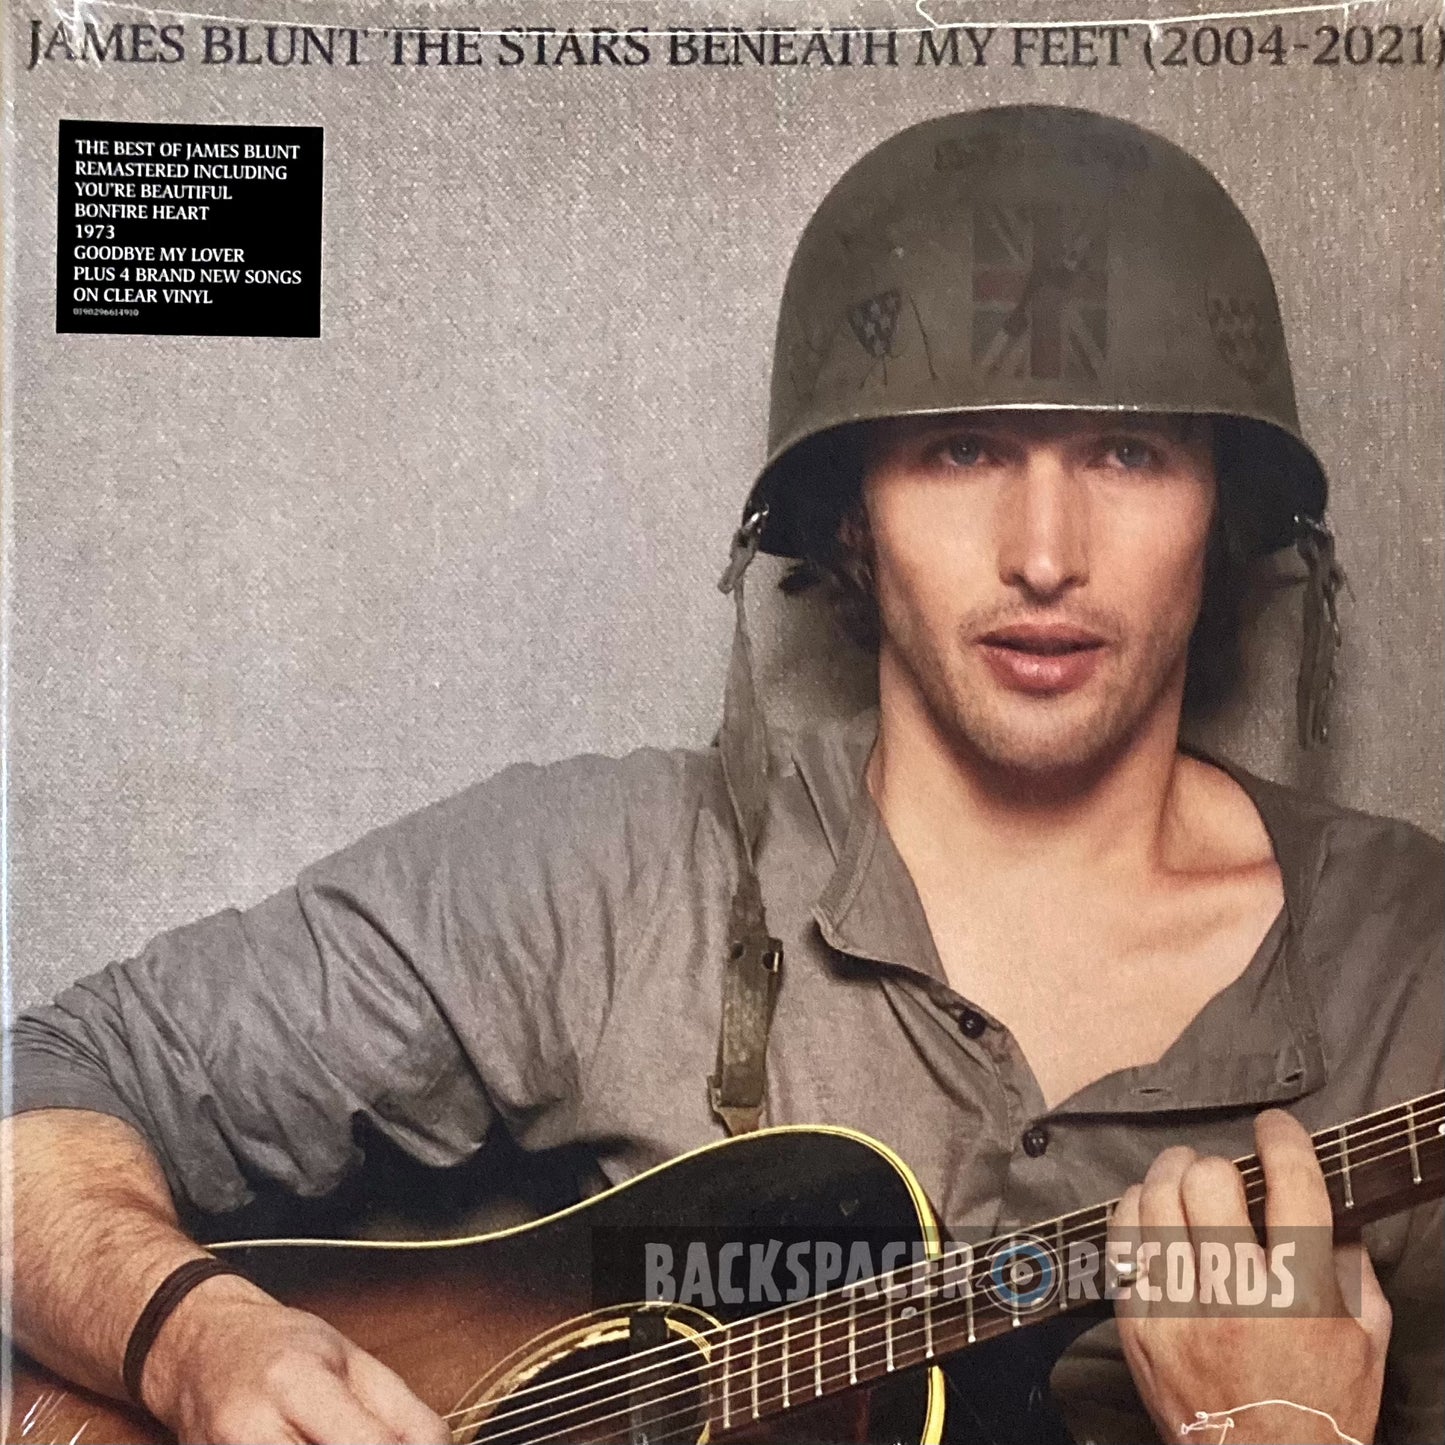 James Blunt - The Stars Beneath My Feet 2004-2021 (Limited Edition) 2-LP (Sealed)